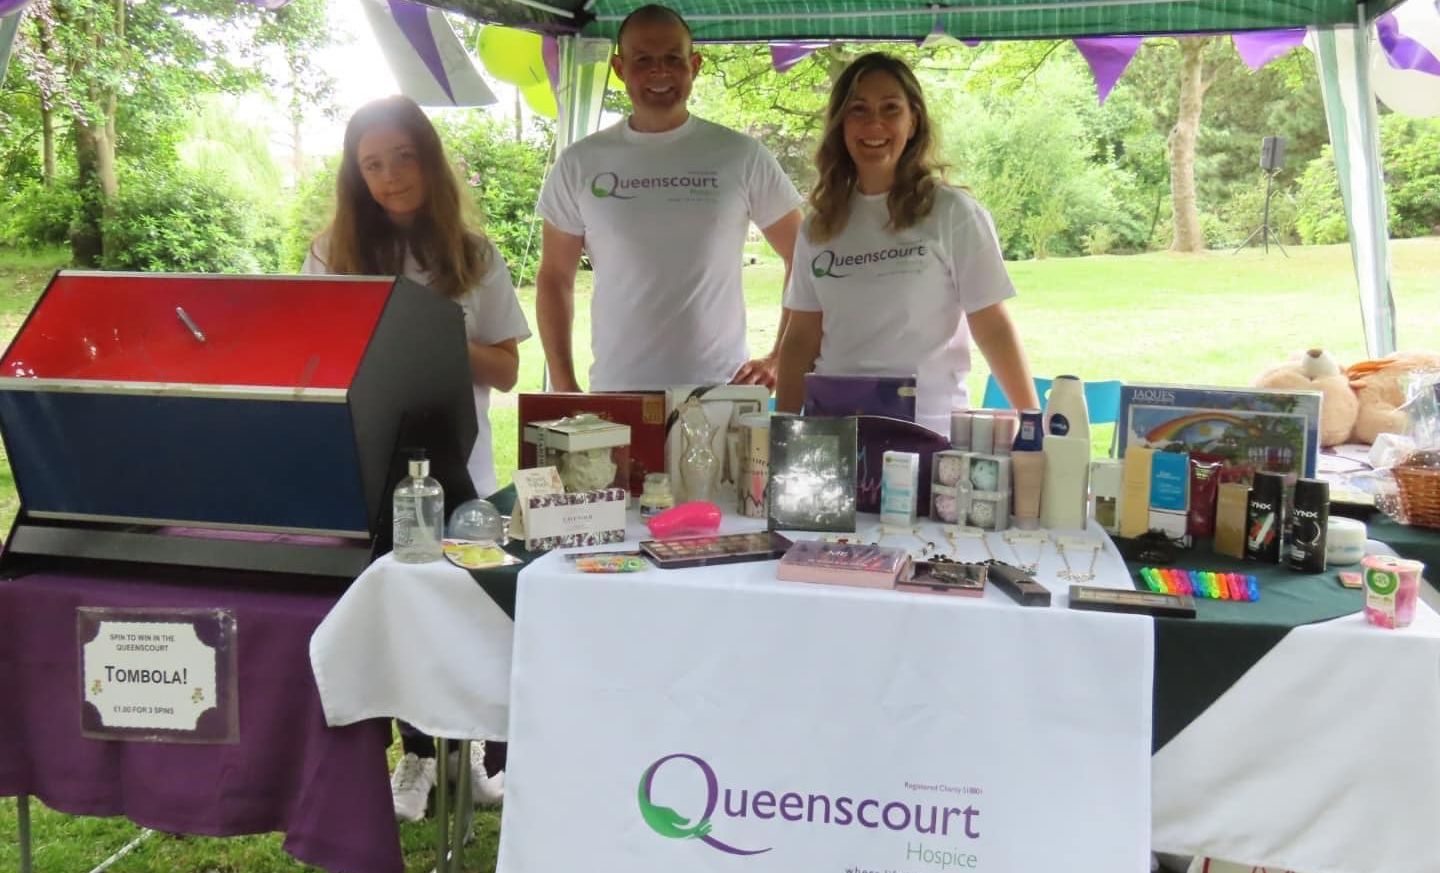 Queenscourt Hospice staff and volunteers said they enjoyed a fantastic day at the Botanic Gardens Family Fun Day in Churchtown in Southport. Photo by Andrew Brown Media